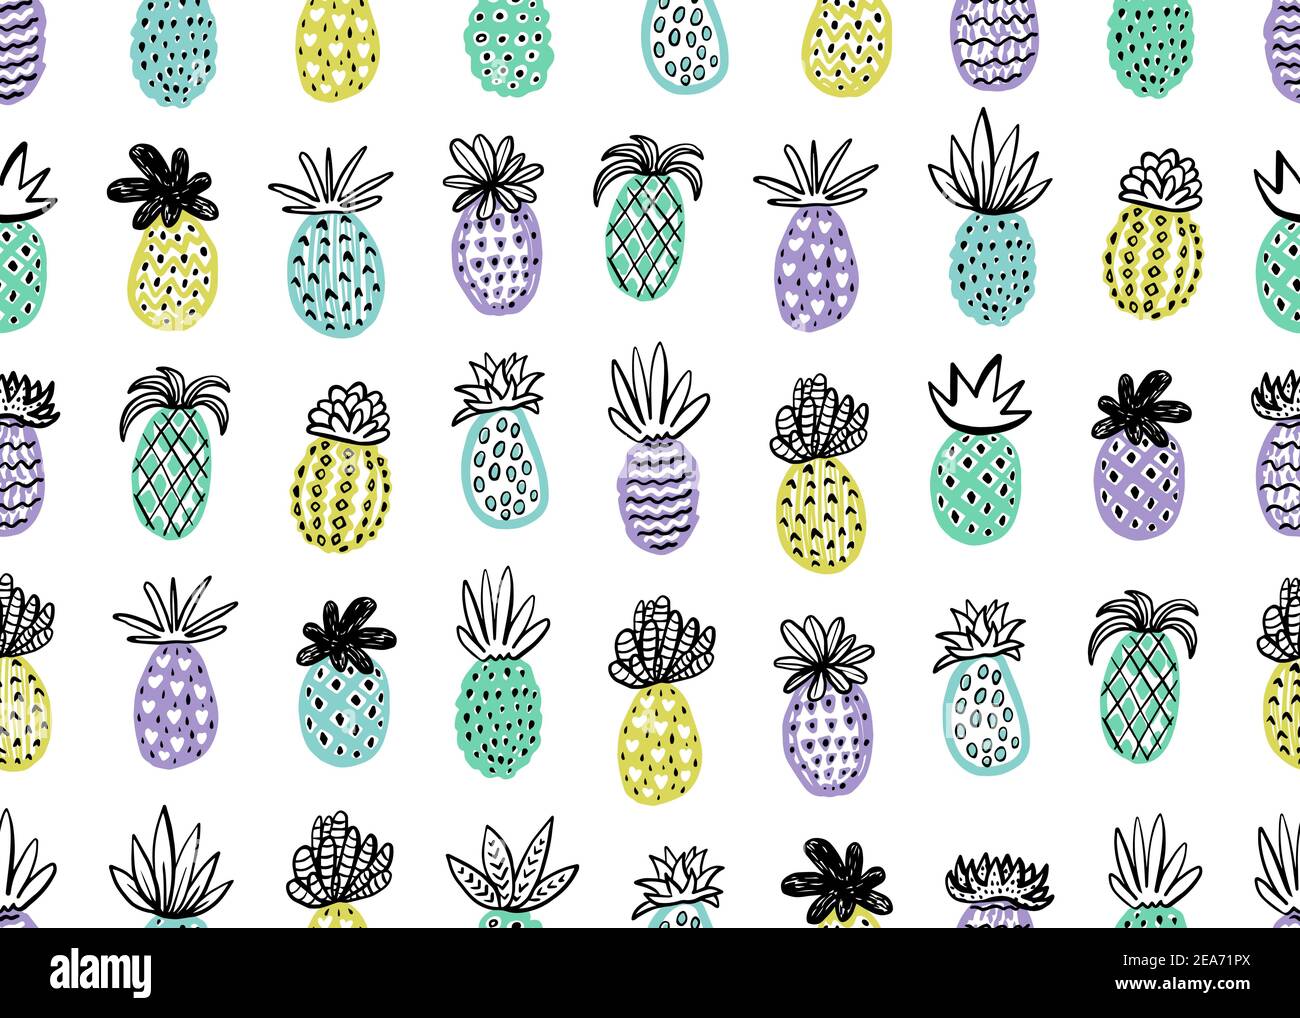 Seamless pineapple pattern. Handdrawn Pineapple with different textures in pastel colors. Exotic fruits background For Fashion print, textile, fabric, Stock Vector